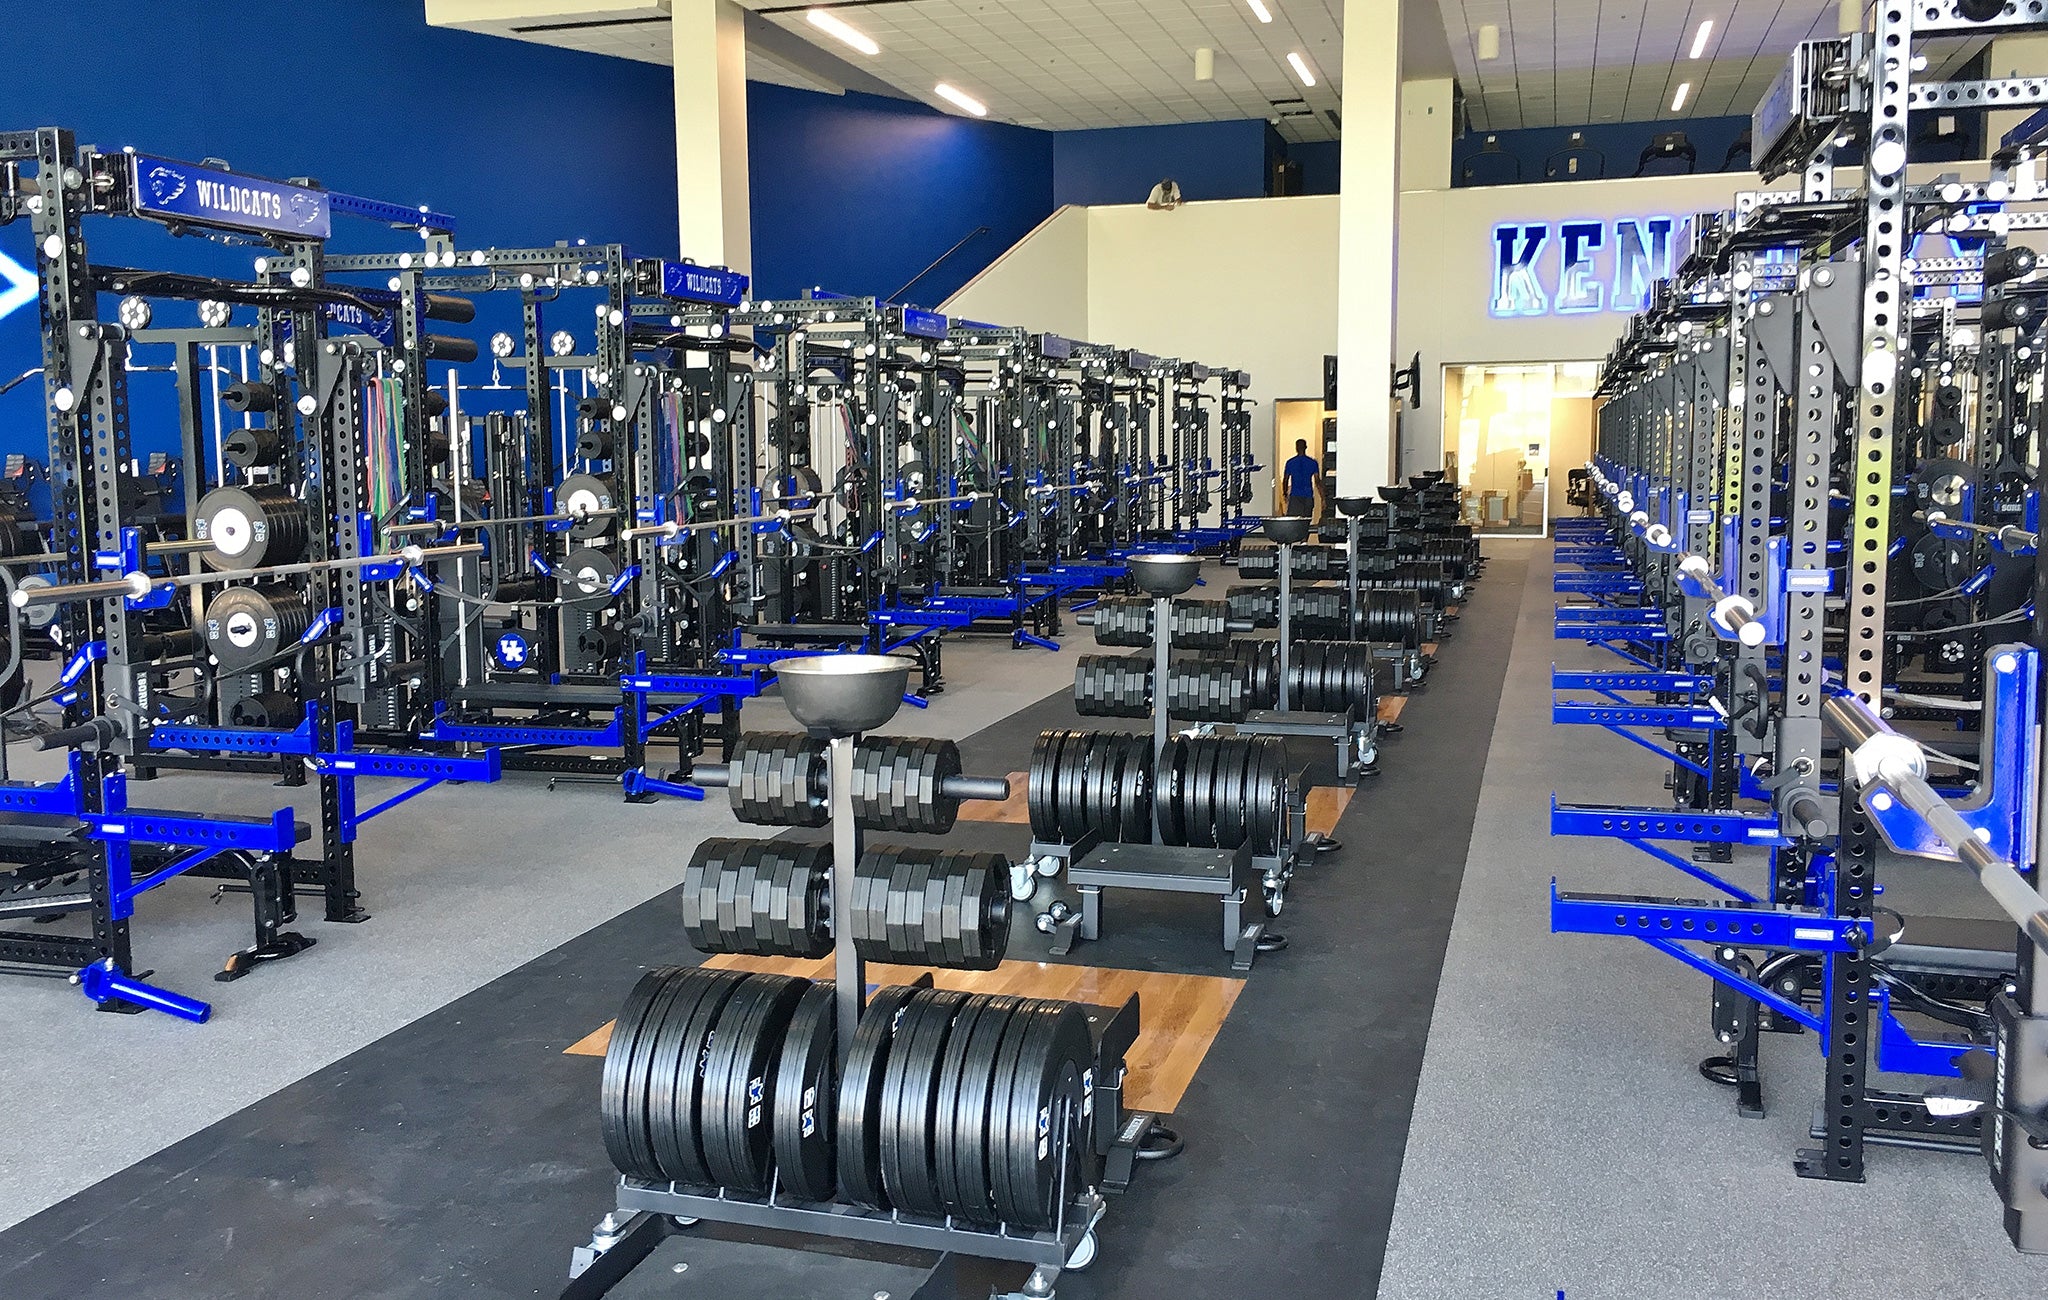 University of Kentucky strength and conditioning